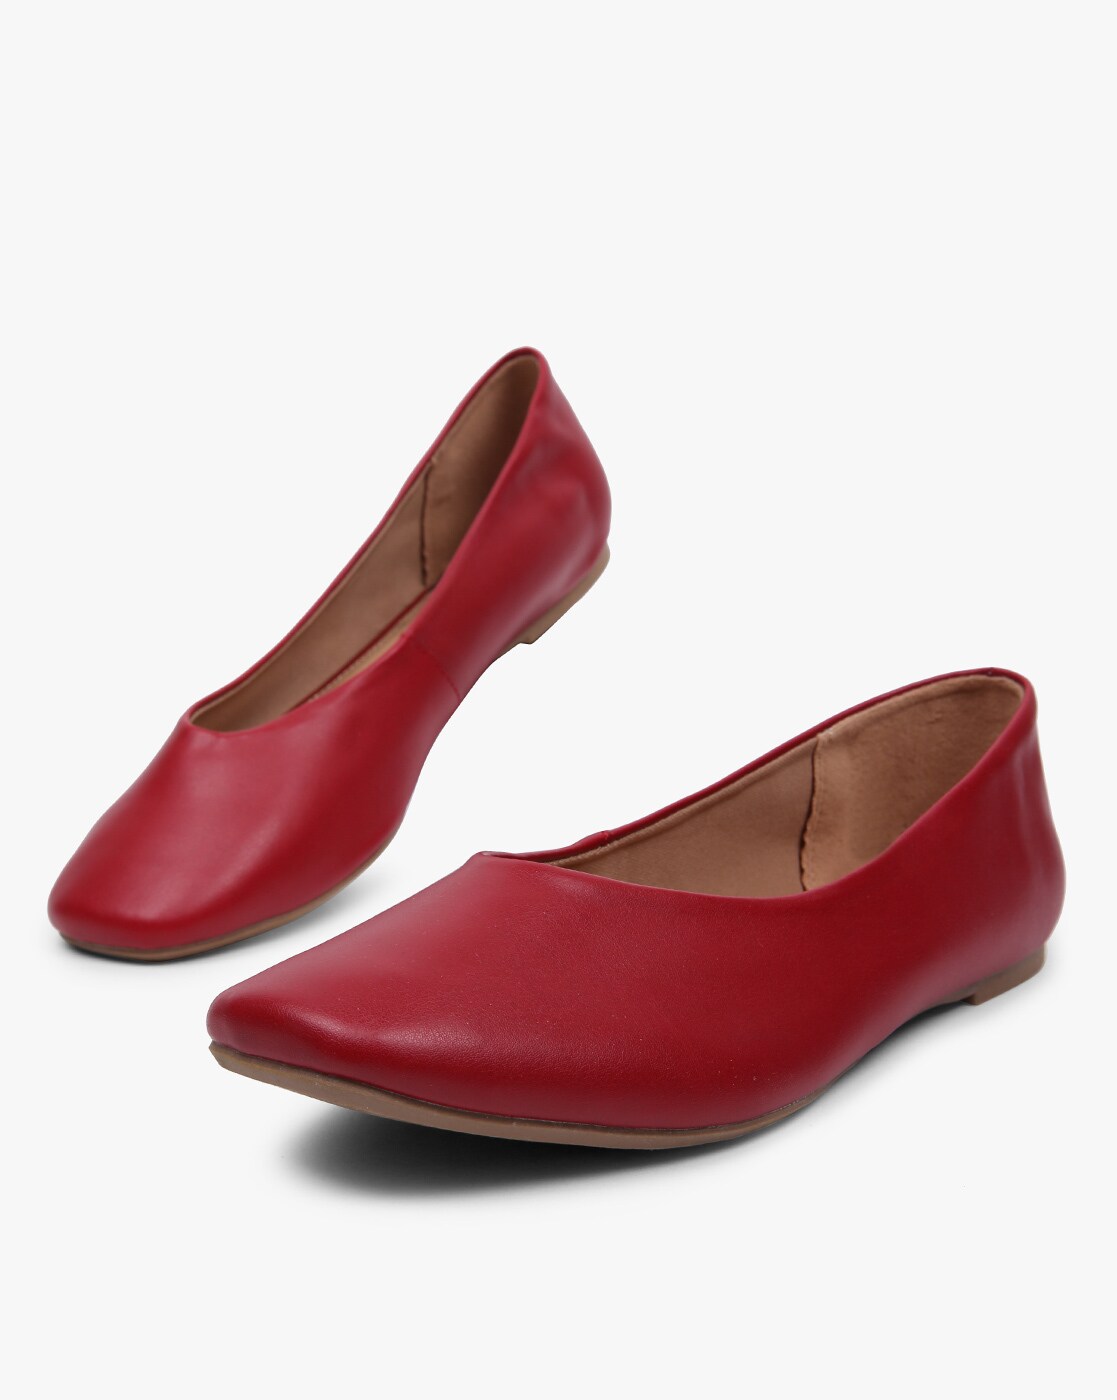 christian siriano red shoes